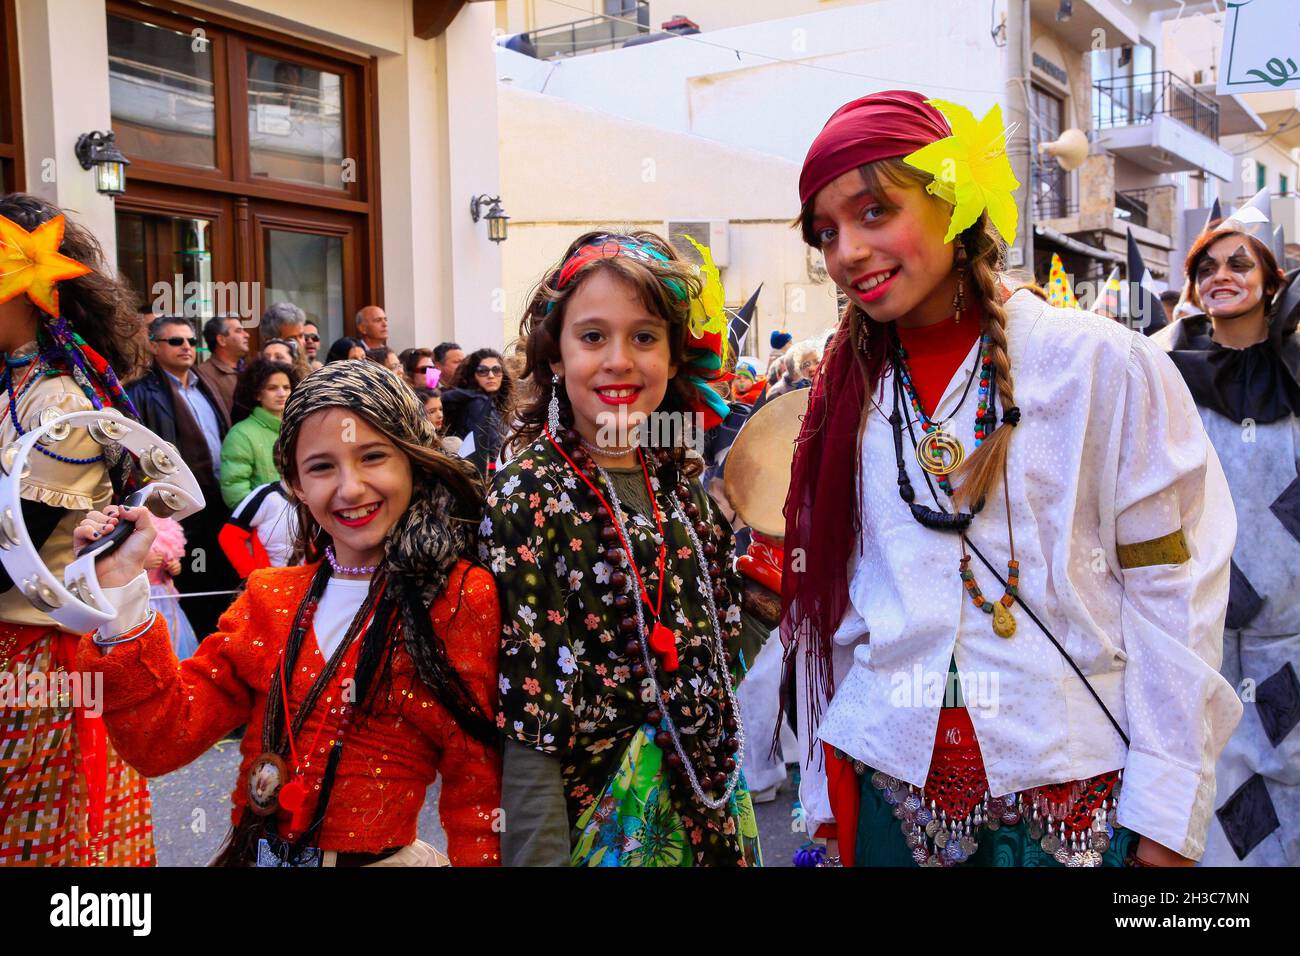 Heraklion, Crete, Greece, March 12, 2016: Participants in colorful costumes  marching and dancing in the streets on Mardi Gras carnival festivities in  Stock Photo - Alamy